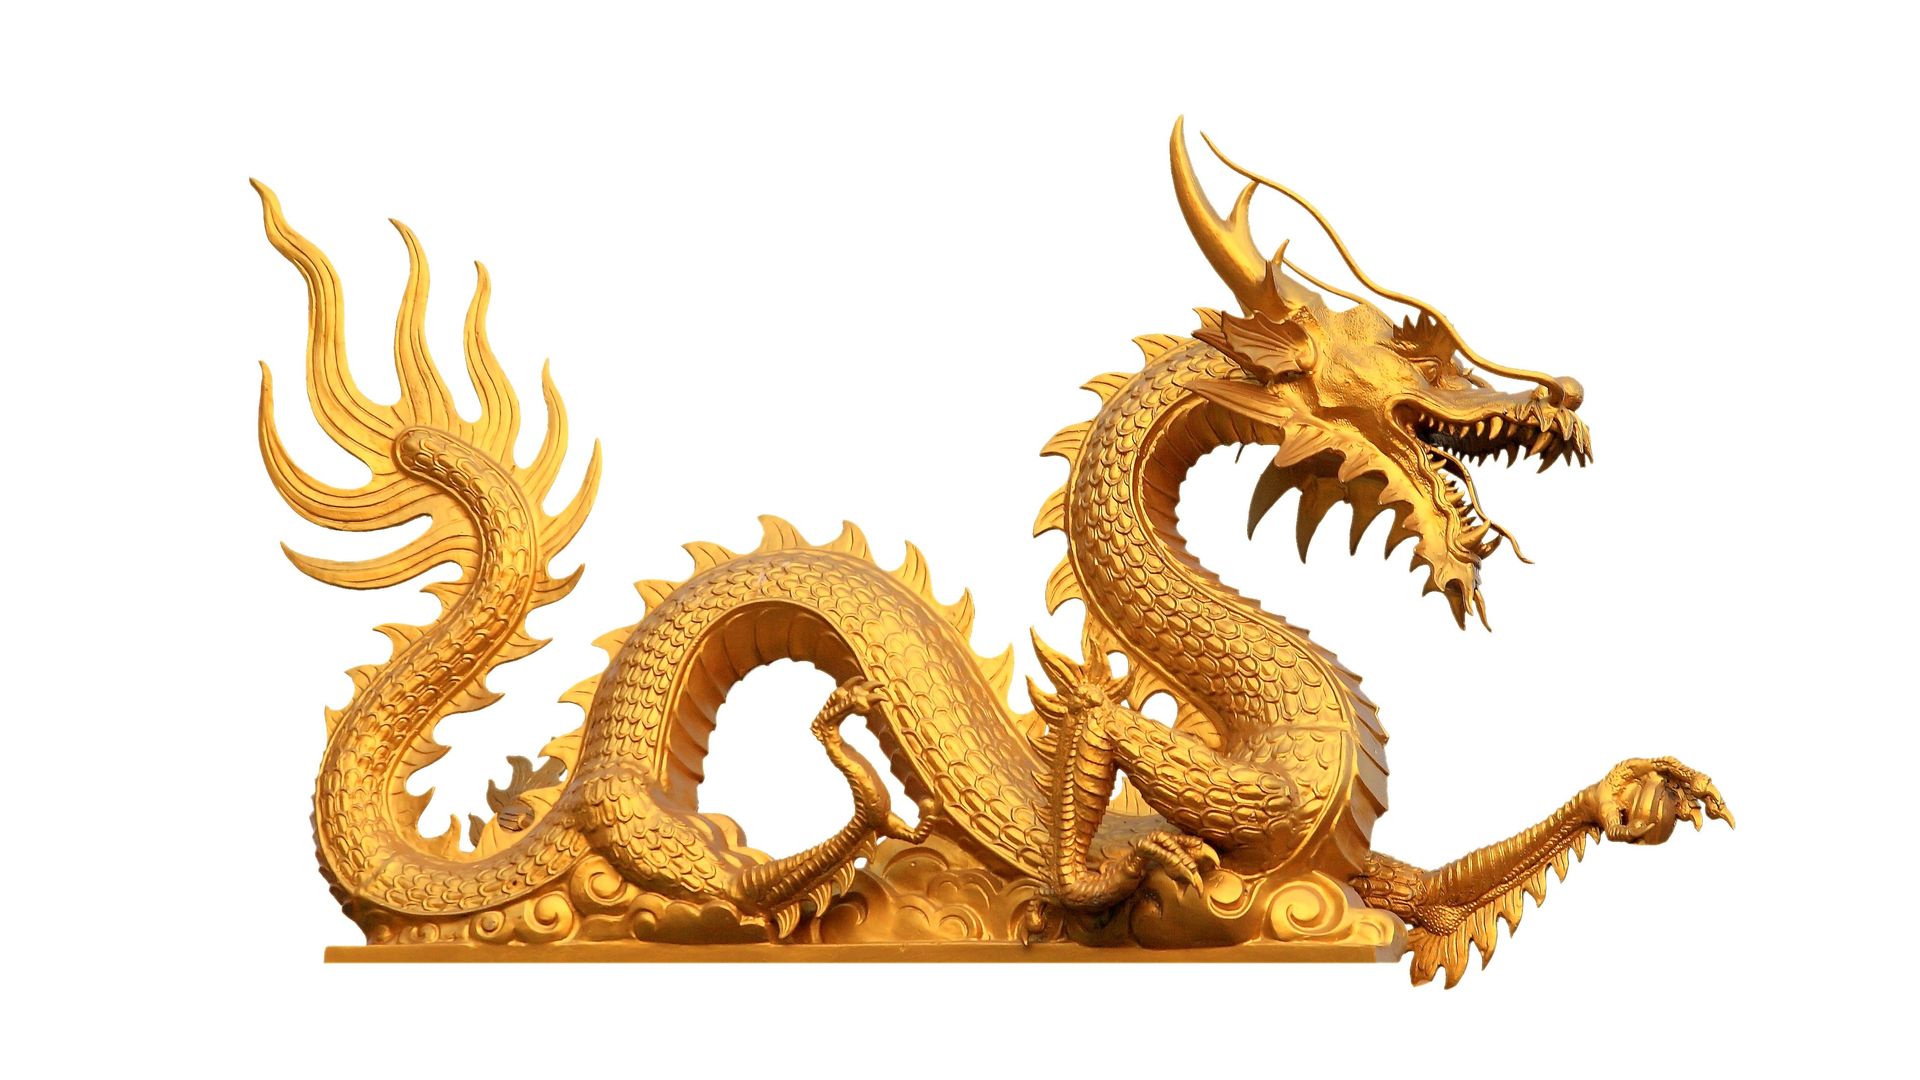 Experts say Chinese New Year gold purchases are driven by unique factors unlike years past teaser image